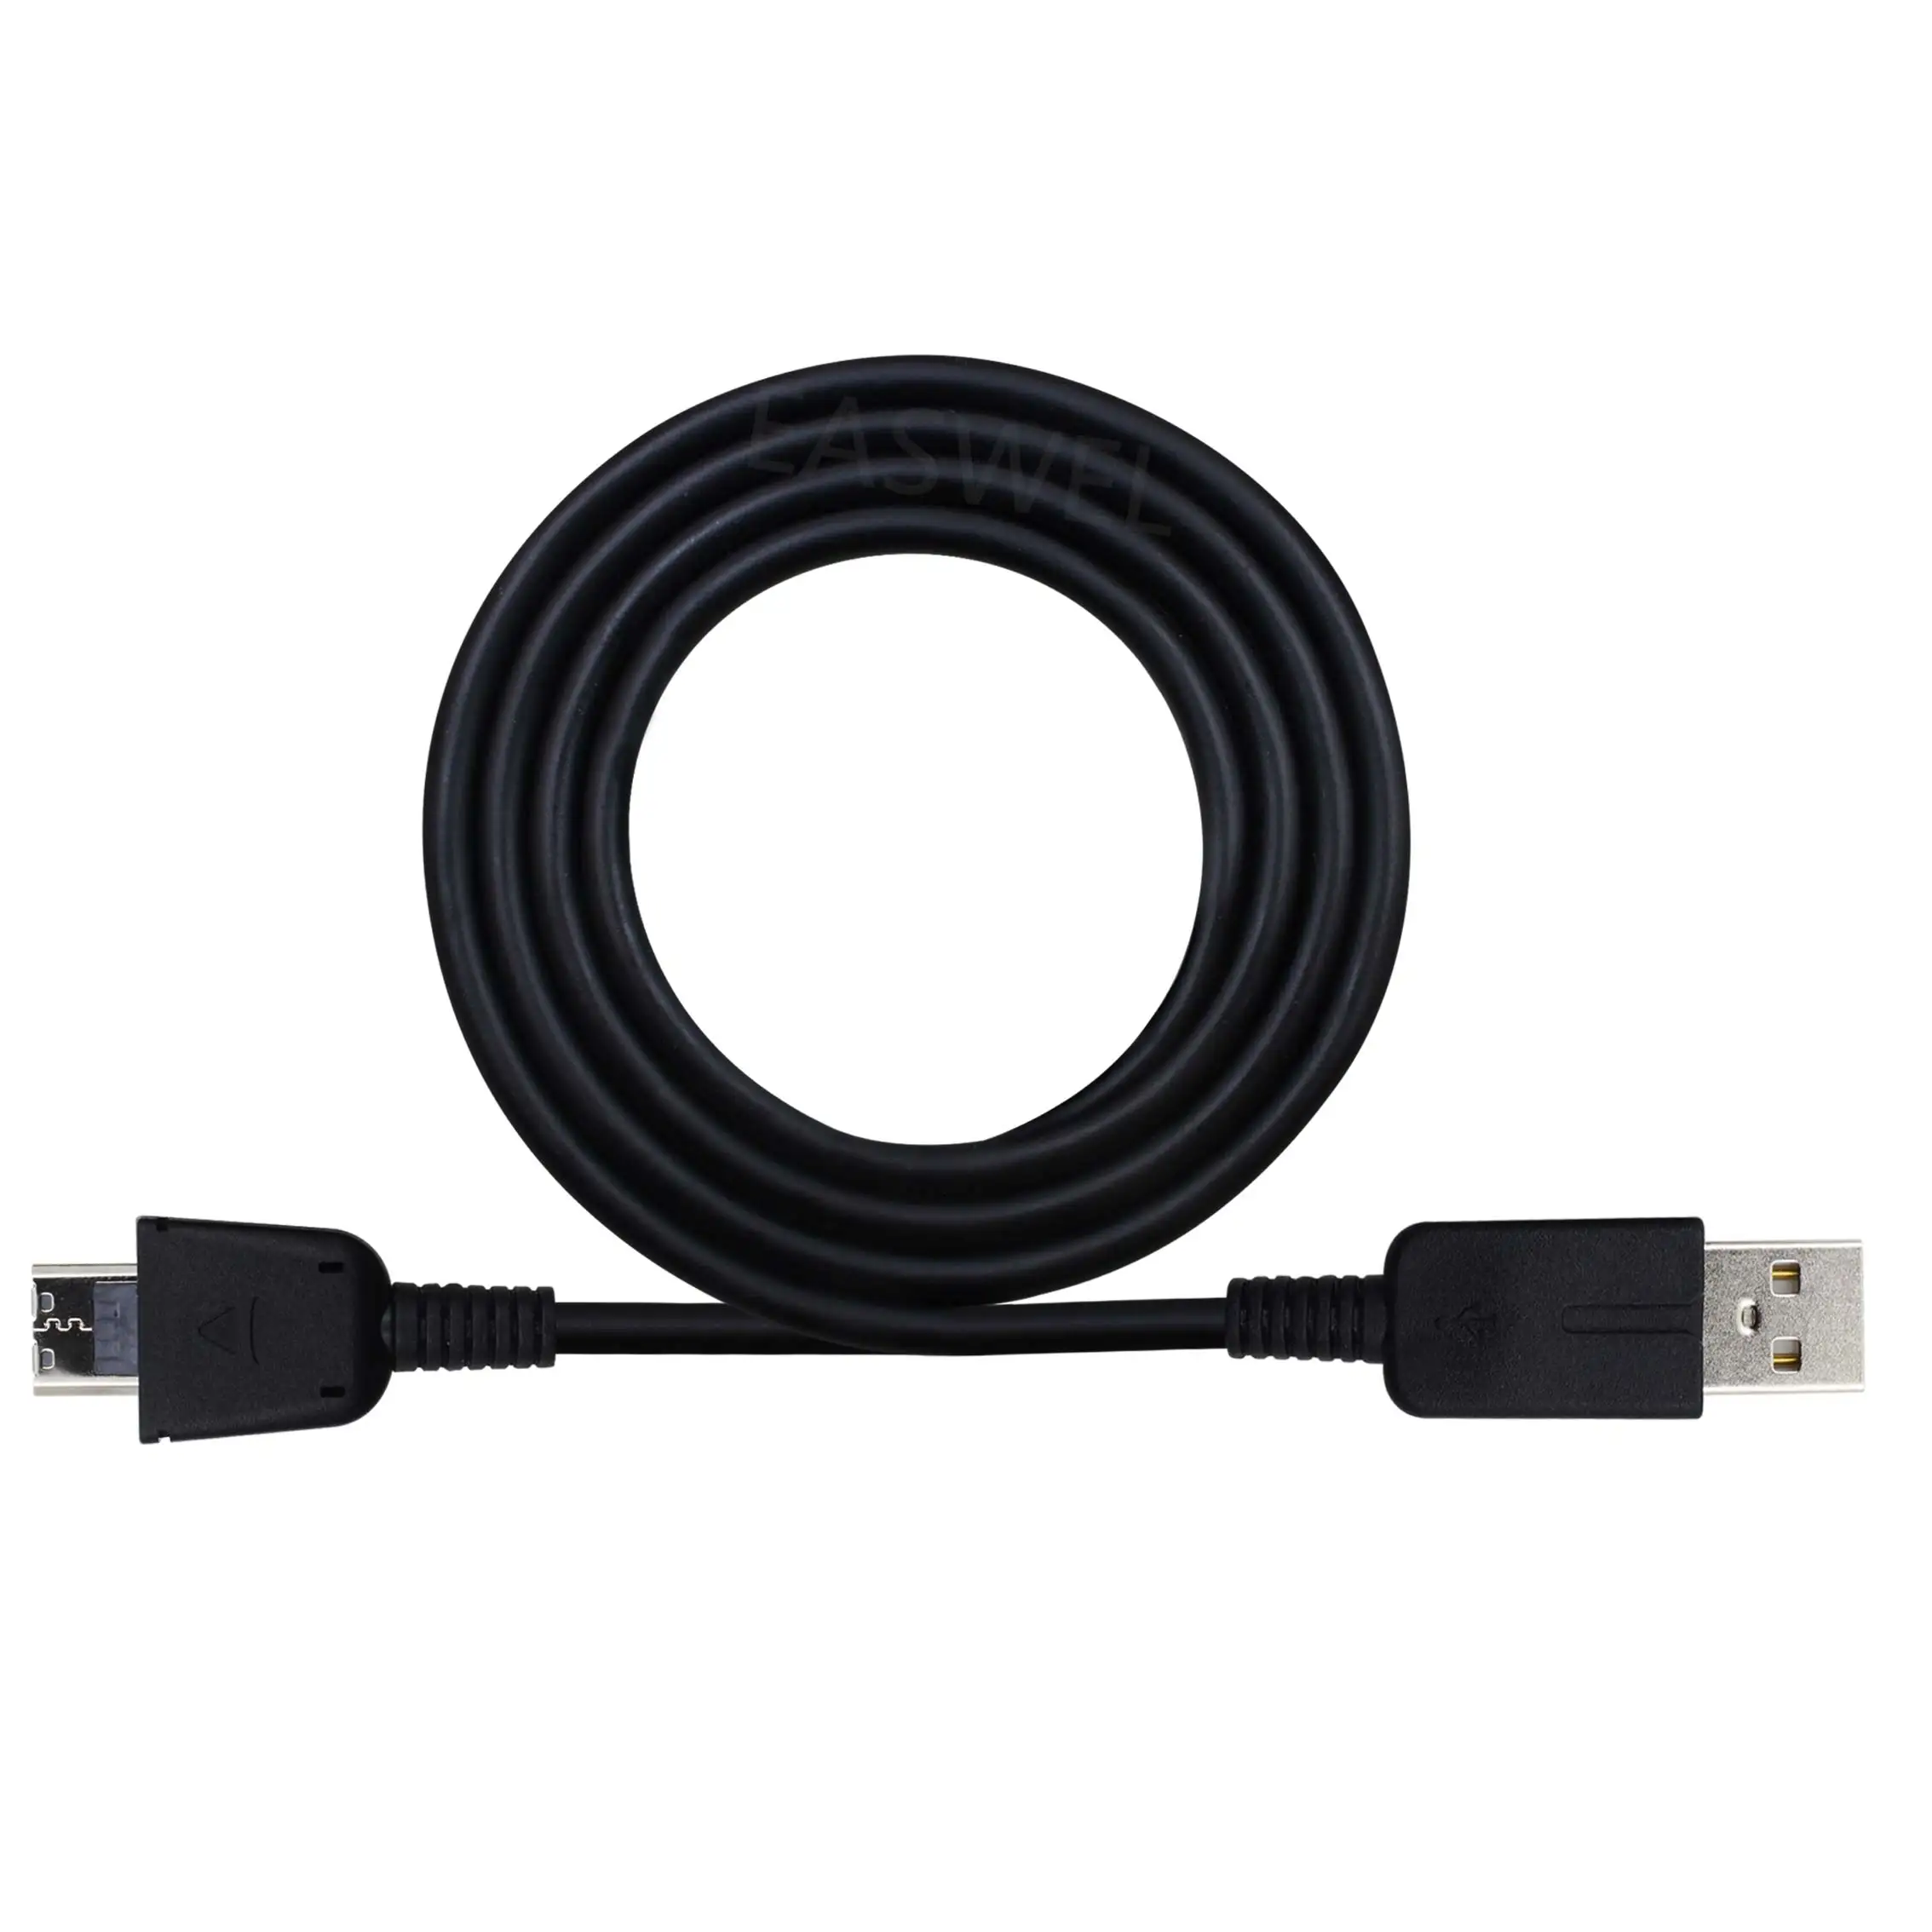 USB 2.0 PC Data Cable Cord Works with Cowon iAudio MP3 Player X5 L Q5/w O2 M3 M4 M5 M6 